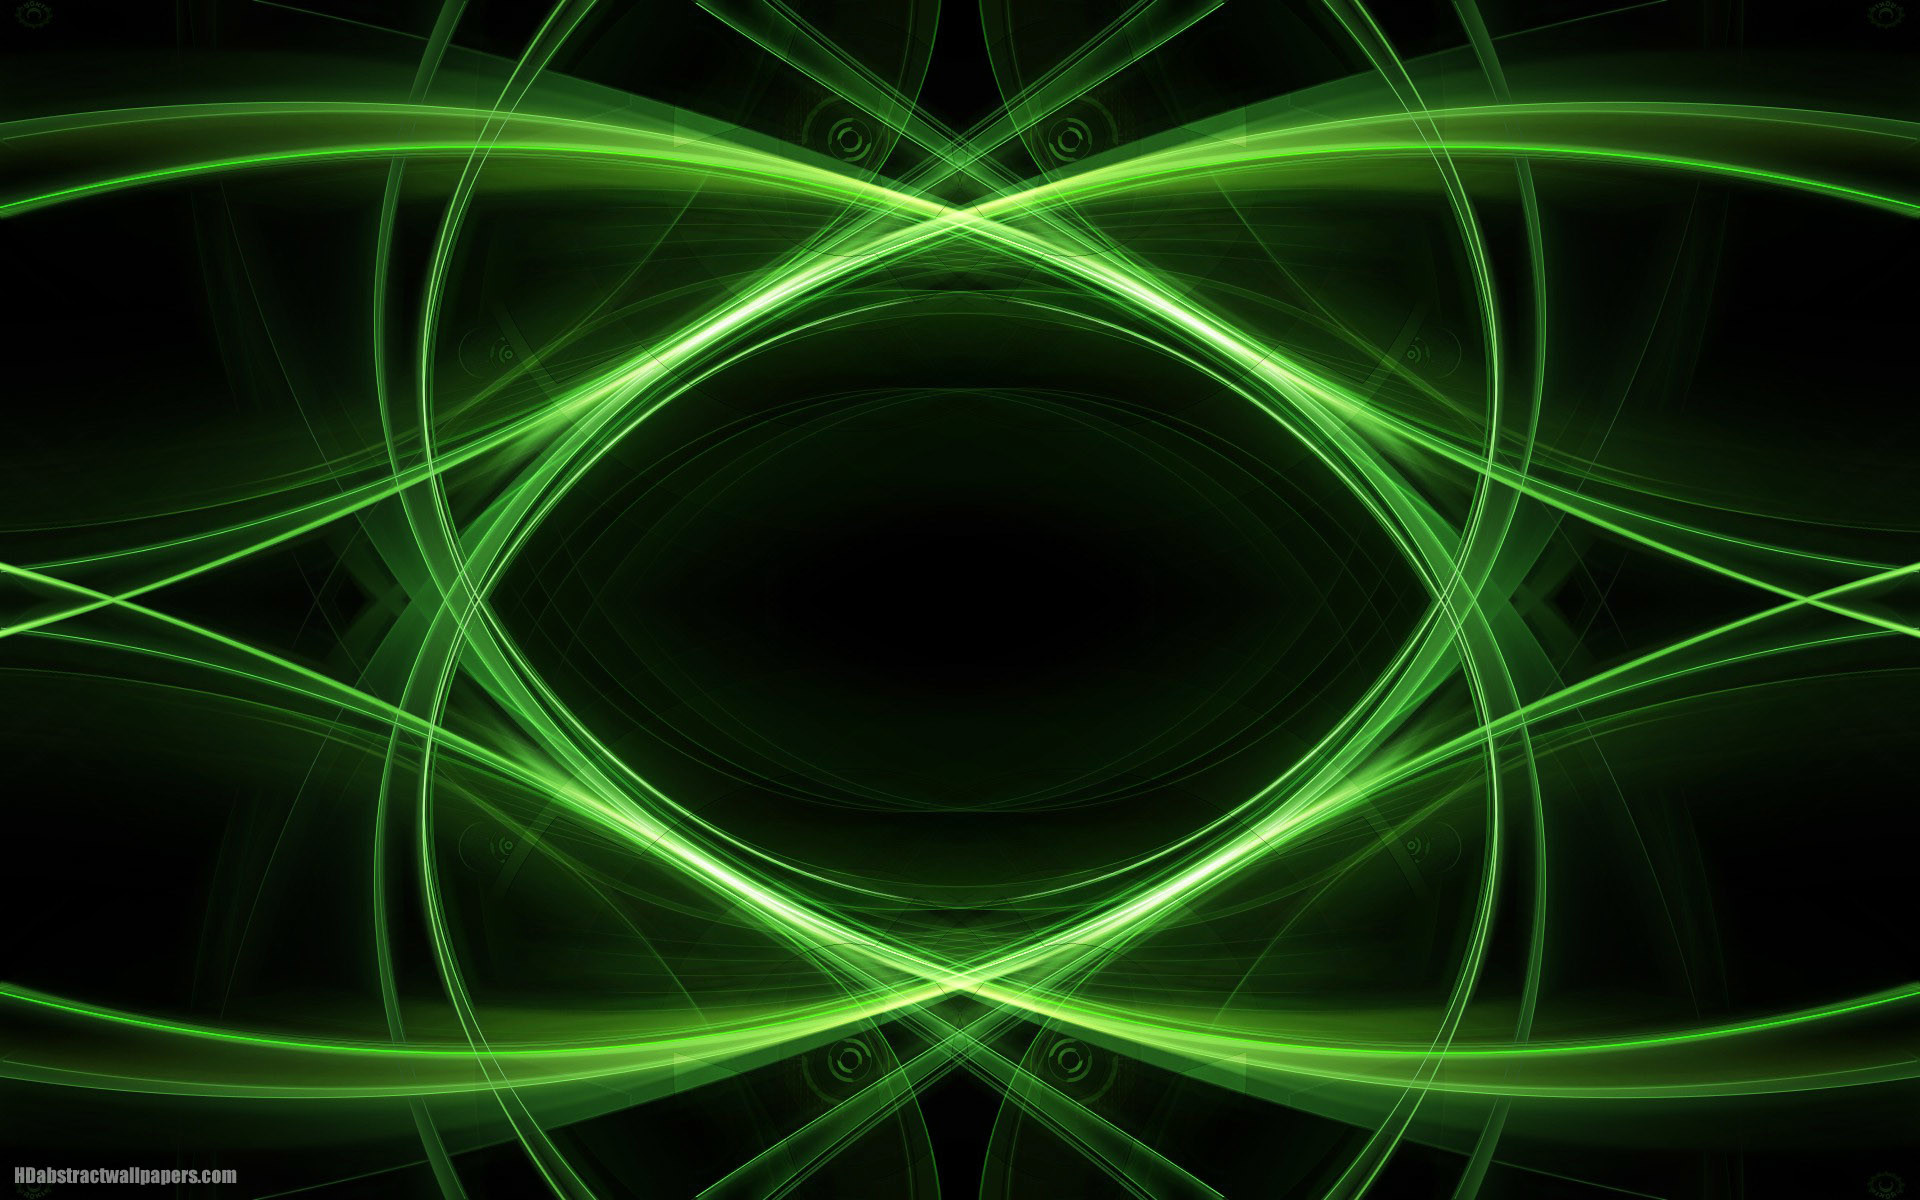 Black abstract wallpaper with green lines